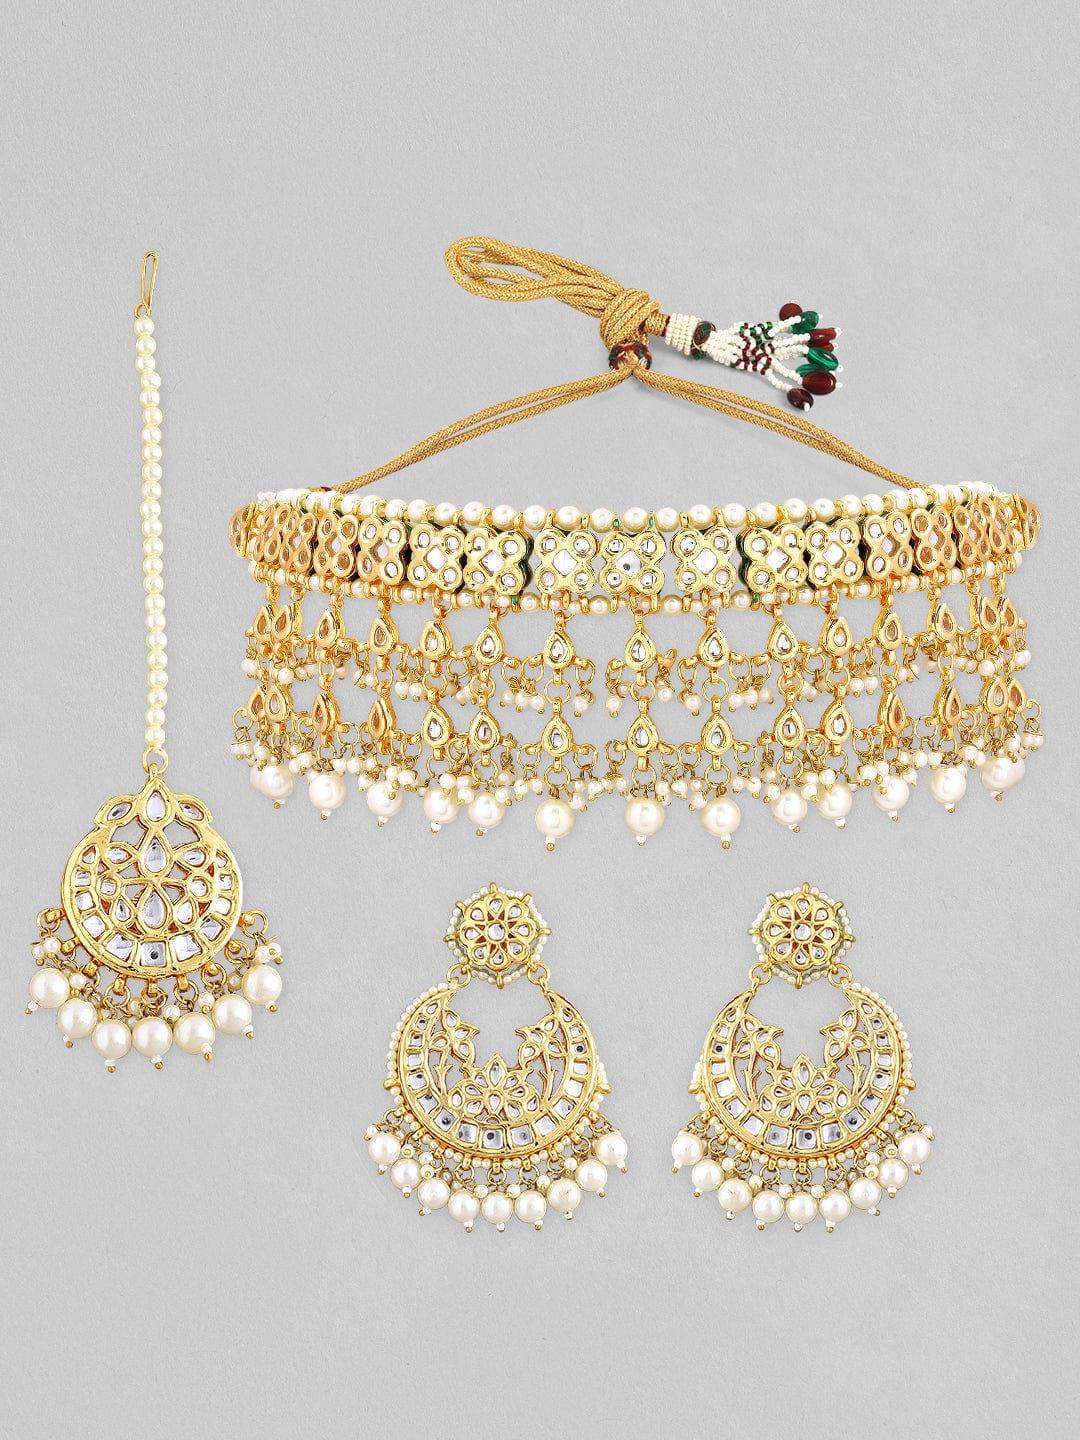 Rubans 22k Gold Plated Kudan Hair Vine With Pearls Design. - Indiakreations